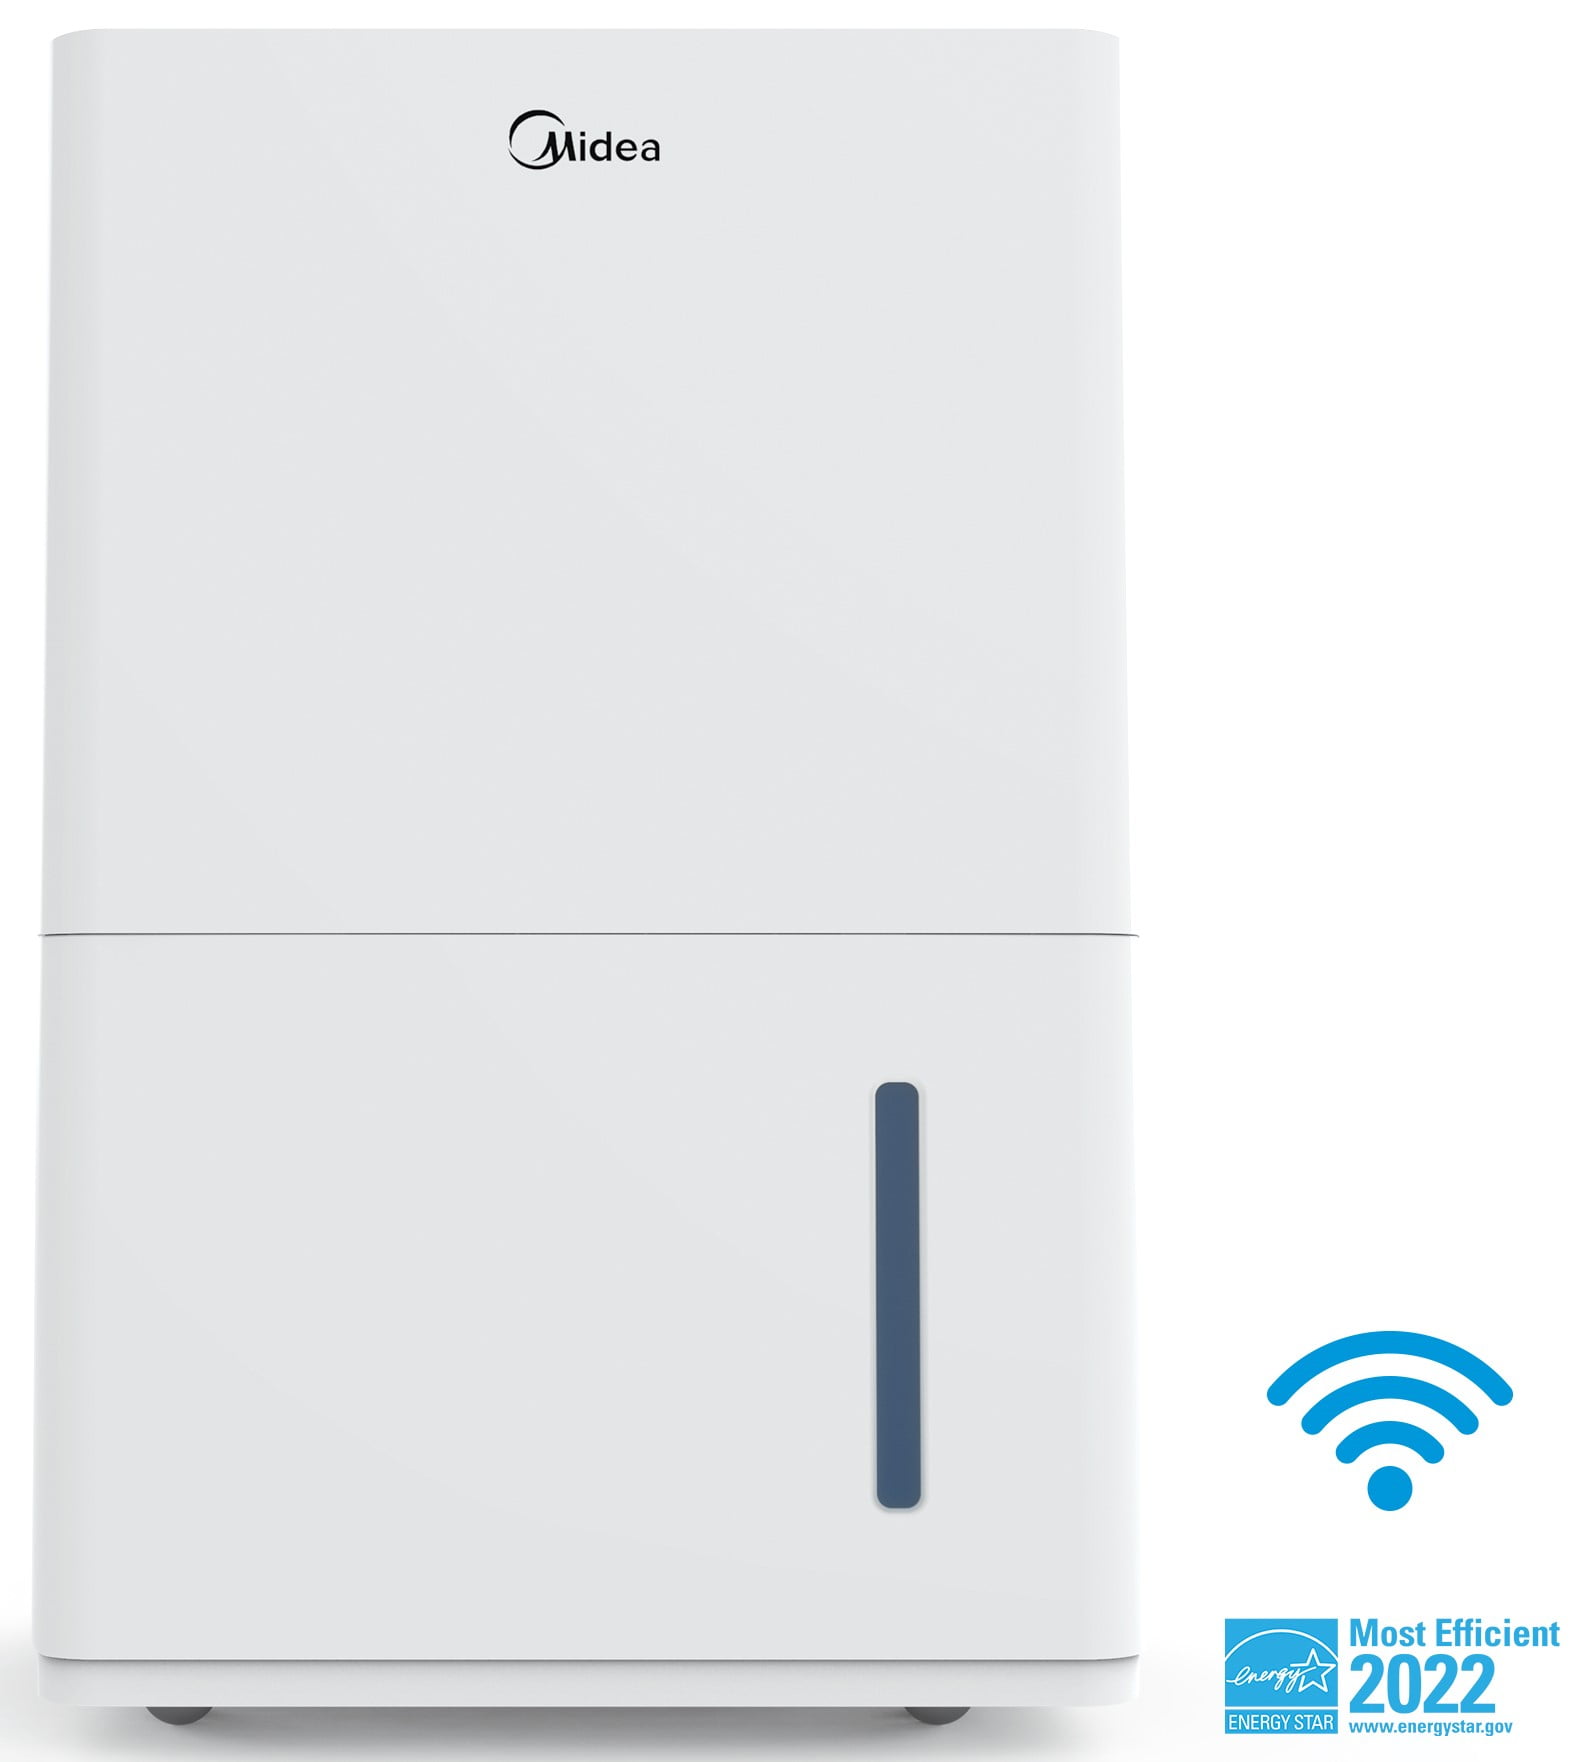 with Digital Control Panel hOmeLabs 3,500 sq Bathrooms 24 Hr Timer Ideal for Bedrooms and Laundry Rooms and Overheat Protection ft Energy Star Dehumidifier with Pump Basements